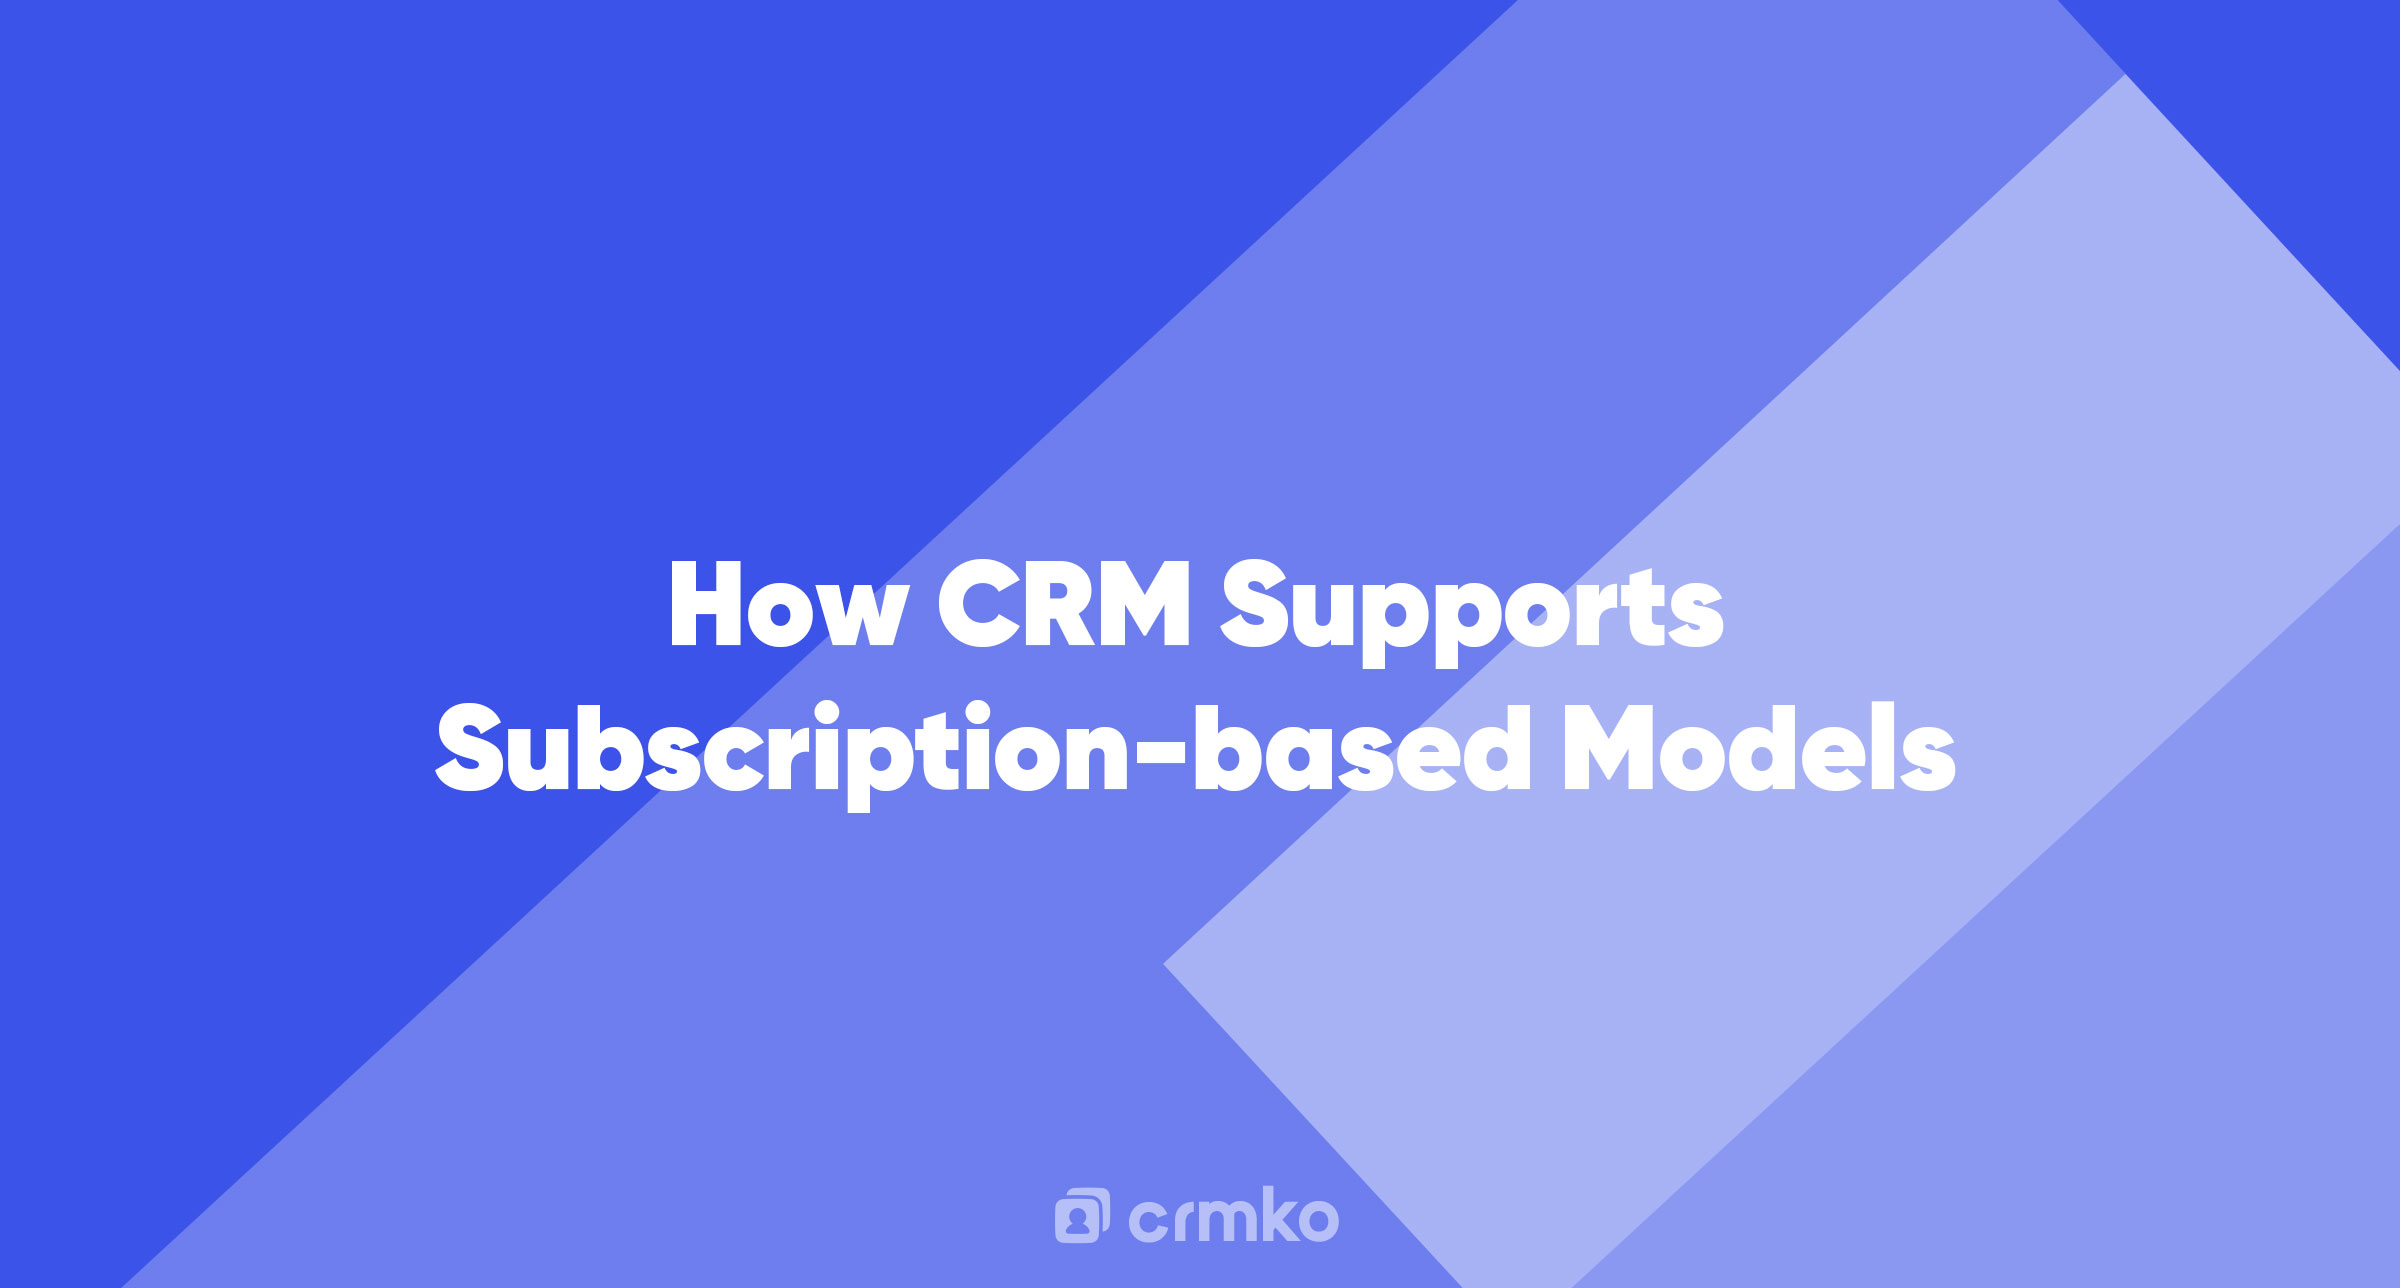 Article | How CRM Supports Subscription-based Models